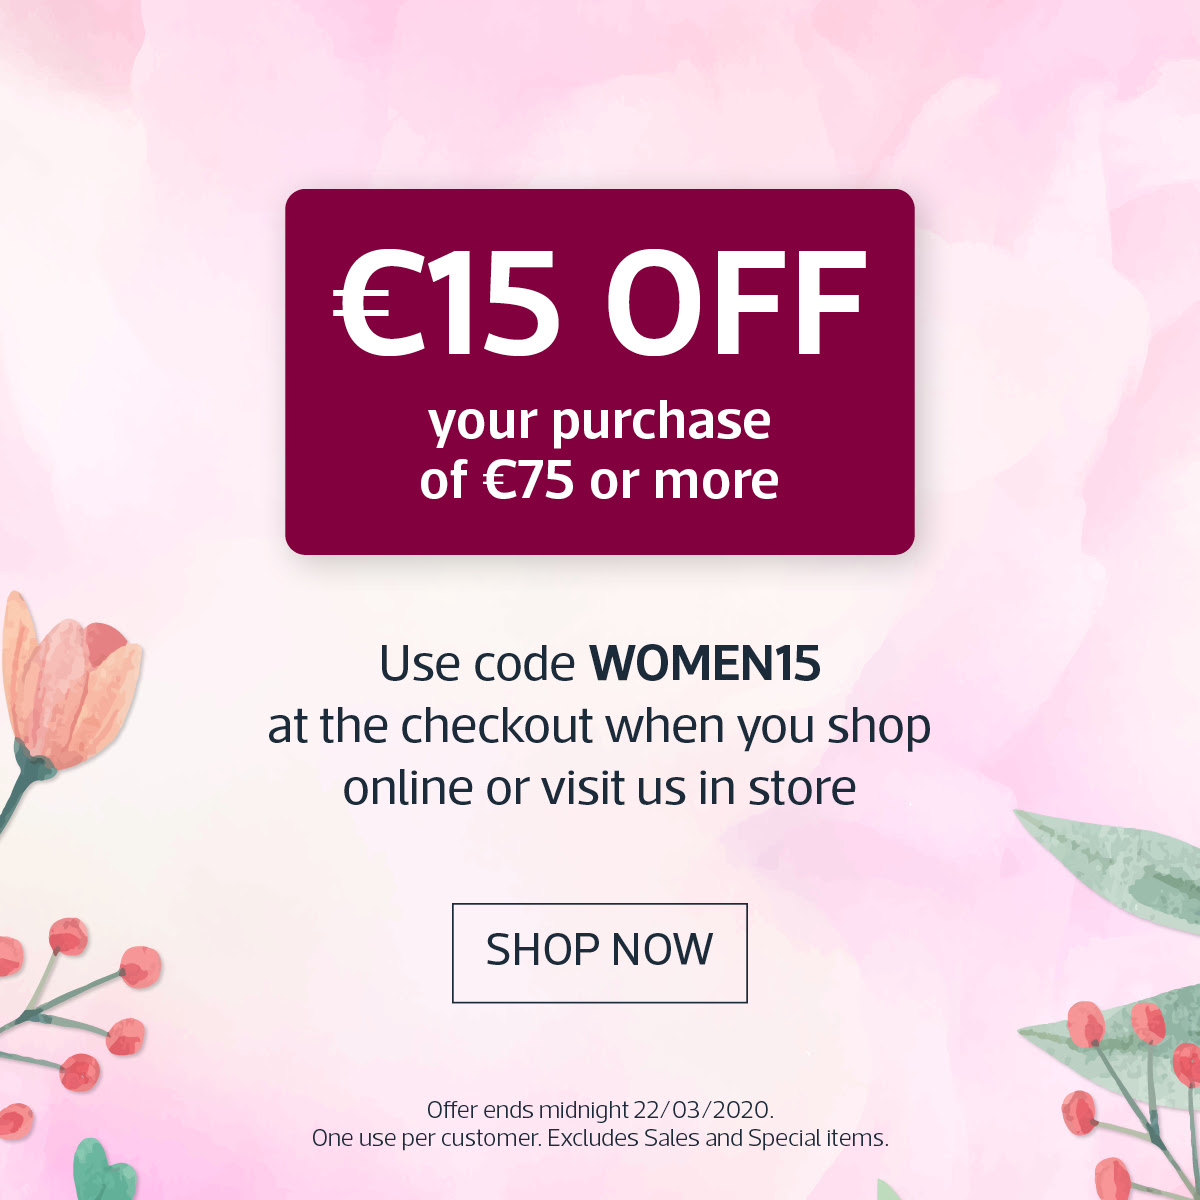 Kilkenny Shop - Here's €15 To Shop